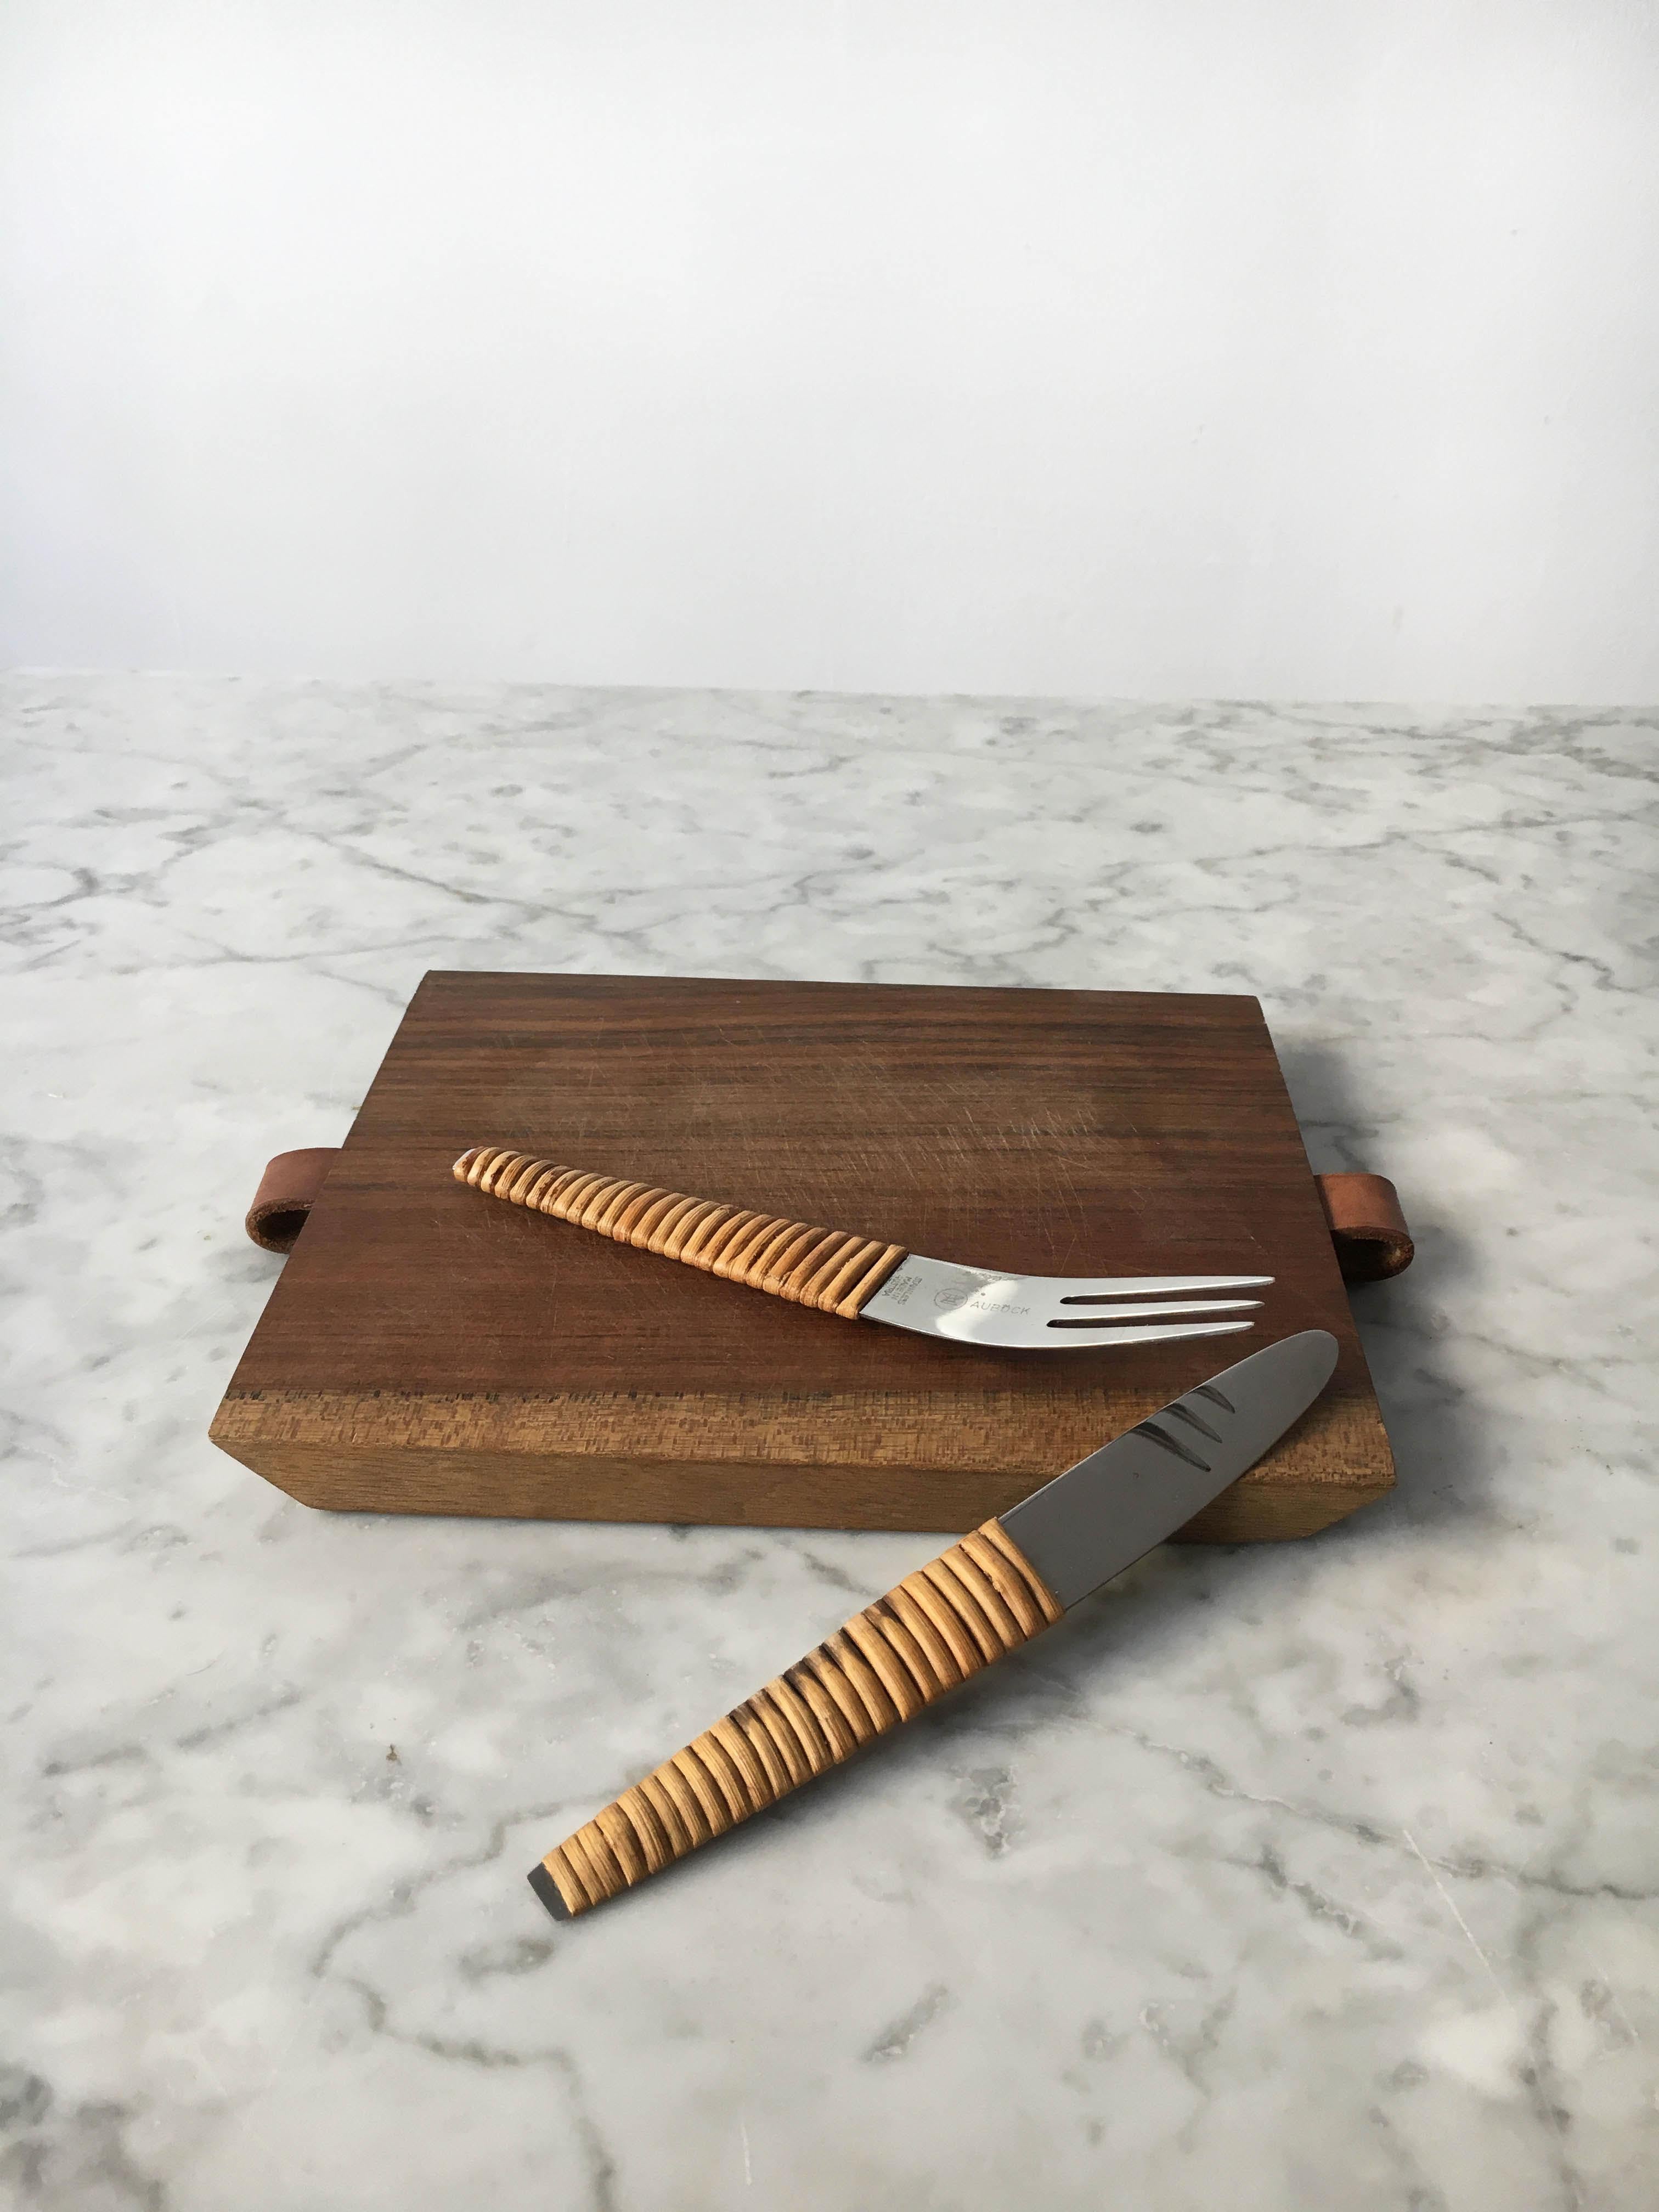 Carl Auböck Pic-Nick Board with Knife and Fork, Austria, 1950s For Sale 1